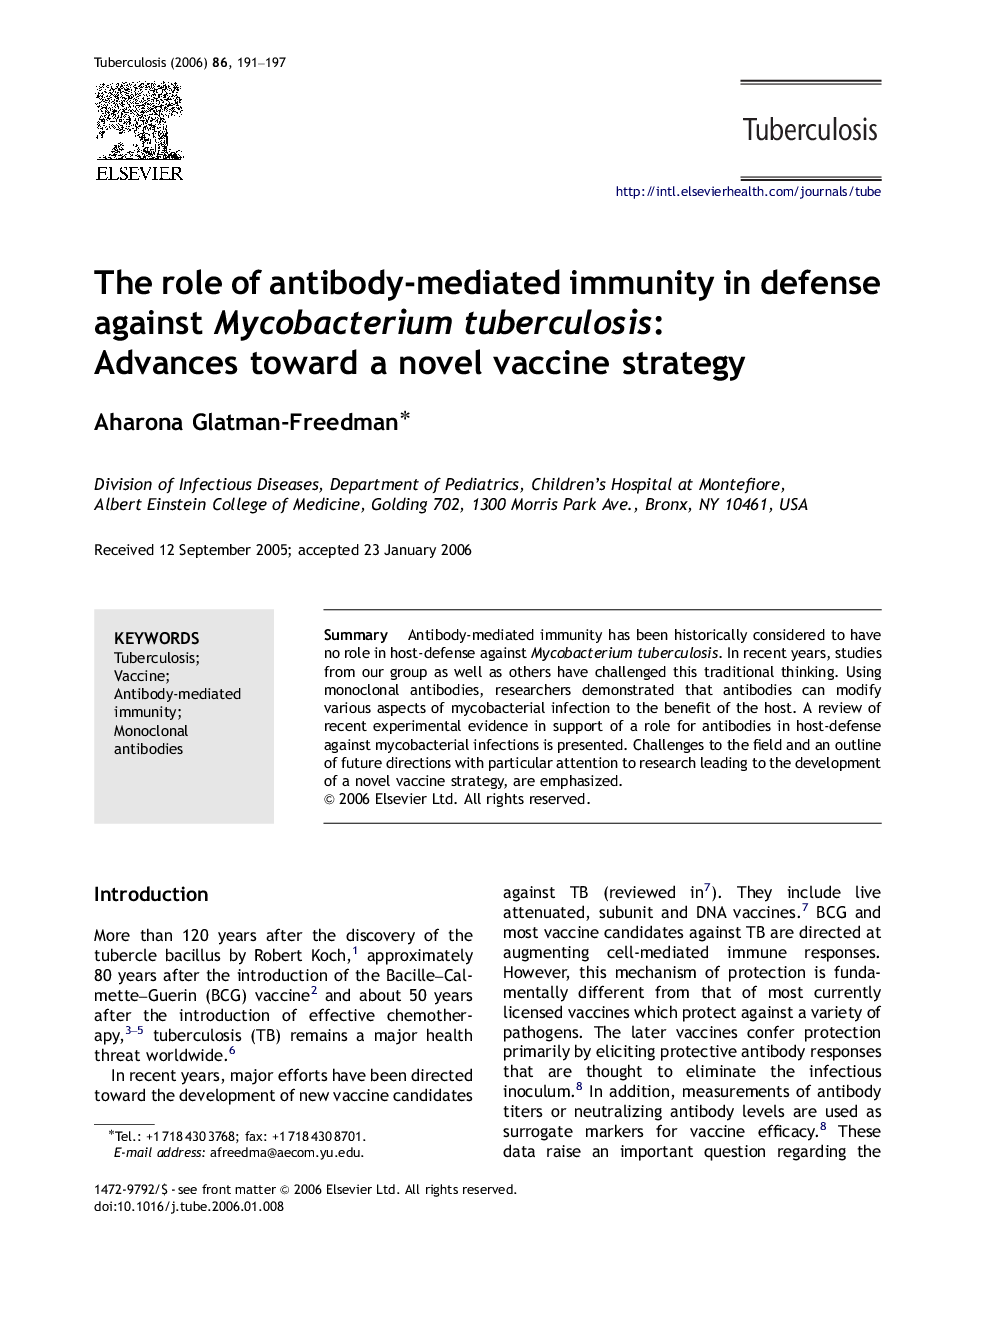 The role of antibody-mediated immunity in defense against Mycobacterium tuberculosis: Advances toward a novel vaccine strategy